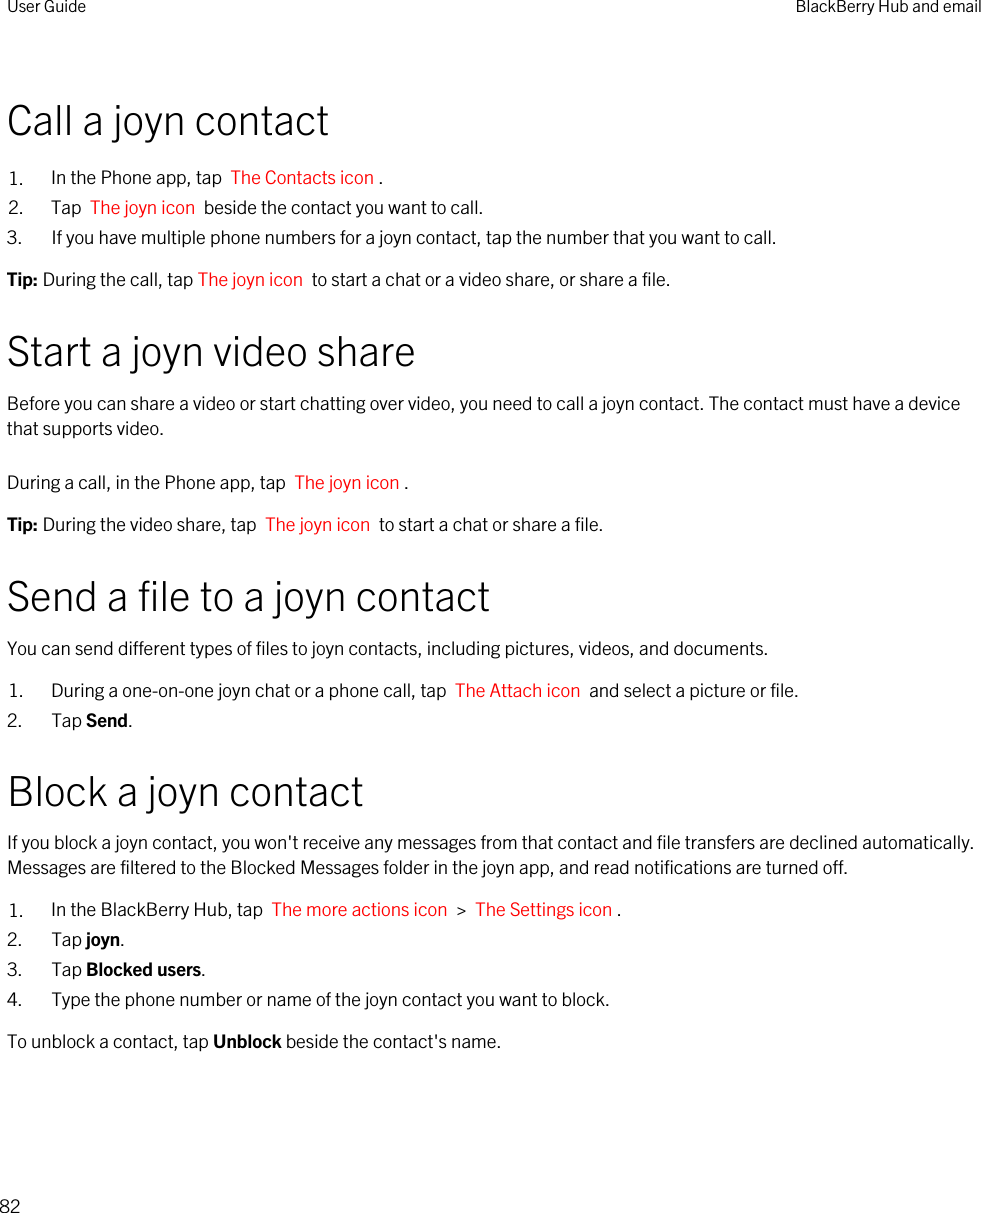 Call a joyn contact1. In the Phone app, tap  The Contacts icon .2. Tap  The joyn icon  beside the contact you want to call.3. If you have multiple phone numbers for a joyn contact, tap the number that you want to call.Tip: During the call, tap The joyn icon  to start a chat or a video share, or share a file.Start a joyn video shareBefore you can share a video or start chatting over video, you need to call a joyn contact. The contact must have a device that supports video.During a call, in the Phone app, tap  The joyn icon . Tip: During the video share, tap  The joyn icon  to start a chat or share a file.Send a file to a joyn contactYou can send different types of files to joyn contacts, including pictures, videos, and documents.1. During a one-on-one joyn chat or a phone call, tap  The Attach icon  and select a picture or file.2. Tap Send.Block a joyn contactIf you block a joyn contact, you won&apos;t receive any messages from that contact and file transfers are declined automatically. Messages are filtered to the Blocked Messages folder in the joyn app, and read notifications are turned off.1. In the BlackBerry Hub, tap  The more actions icon  &gt;  The Settings icon . 2. Tap joyn.3. Tap Blocked users.4. Type the phone number or name of the joyn contact you want to block.To unblock a contact, tap Unblock beside the contact&apos;s name.User Guide BlackBerry Hub and email82